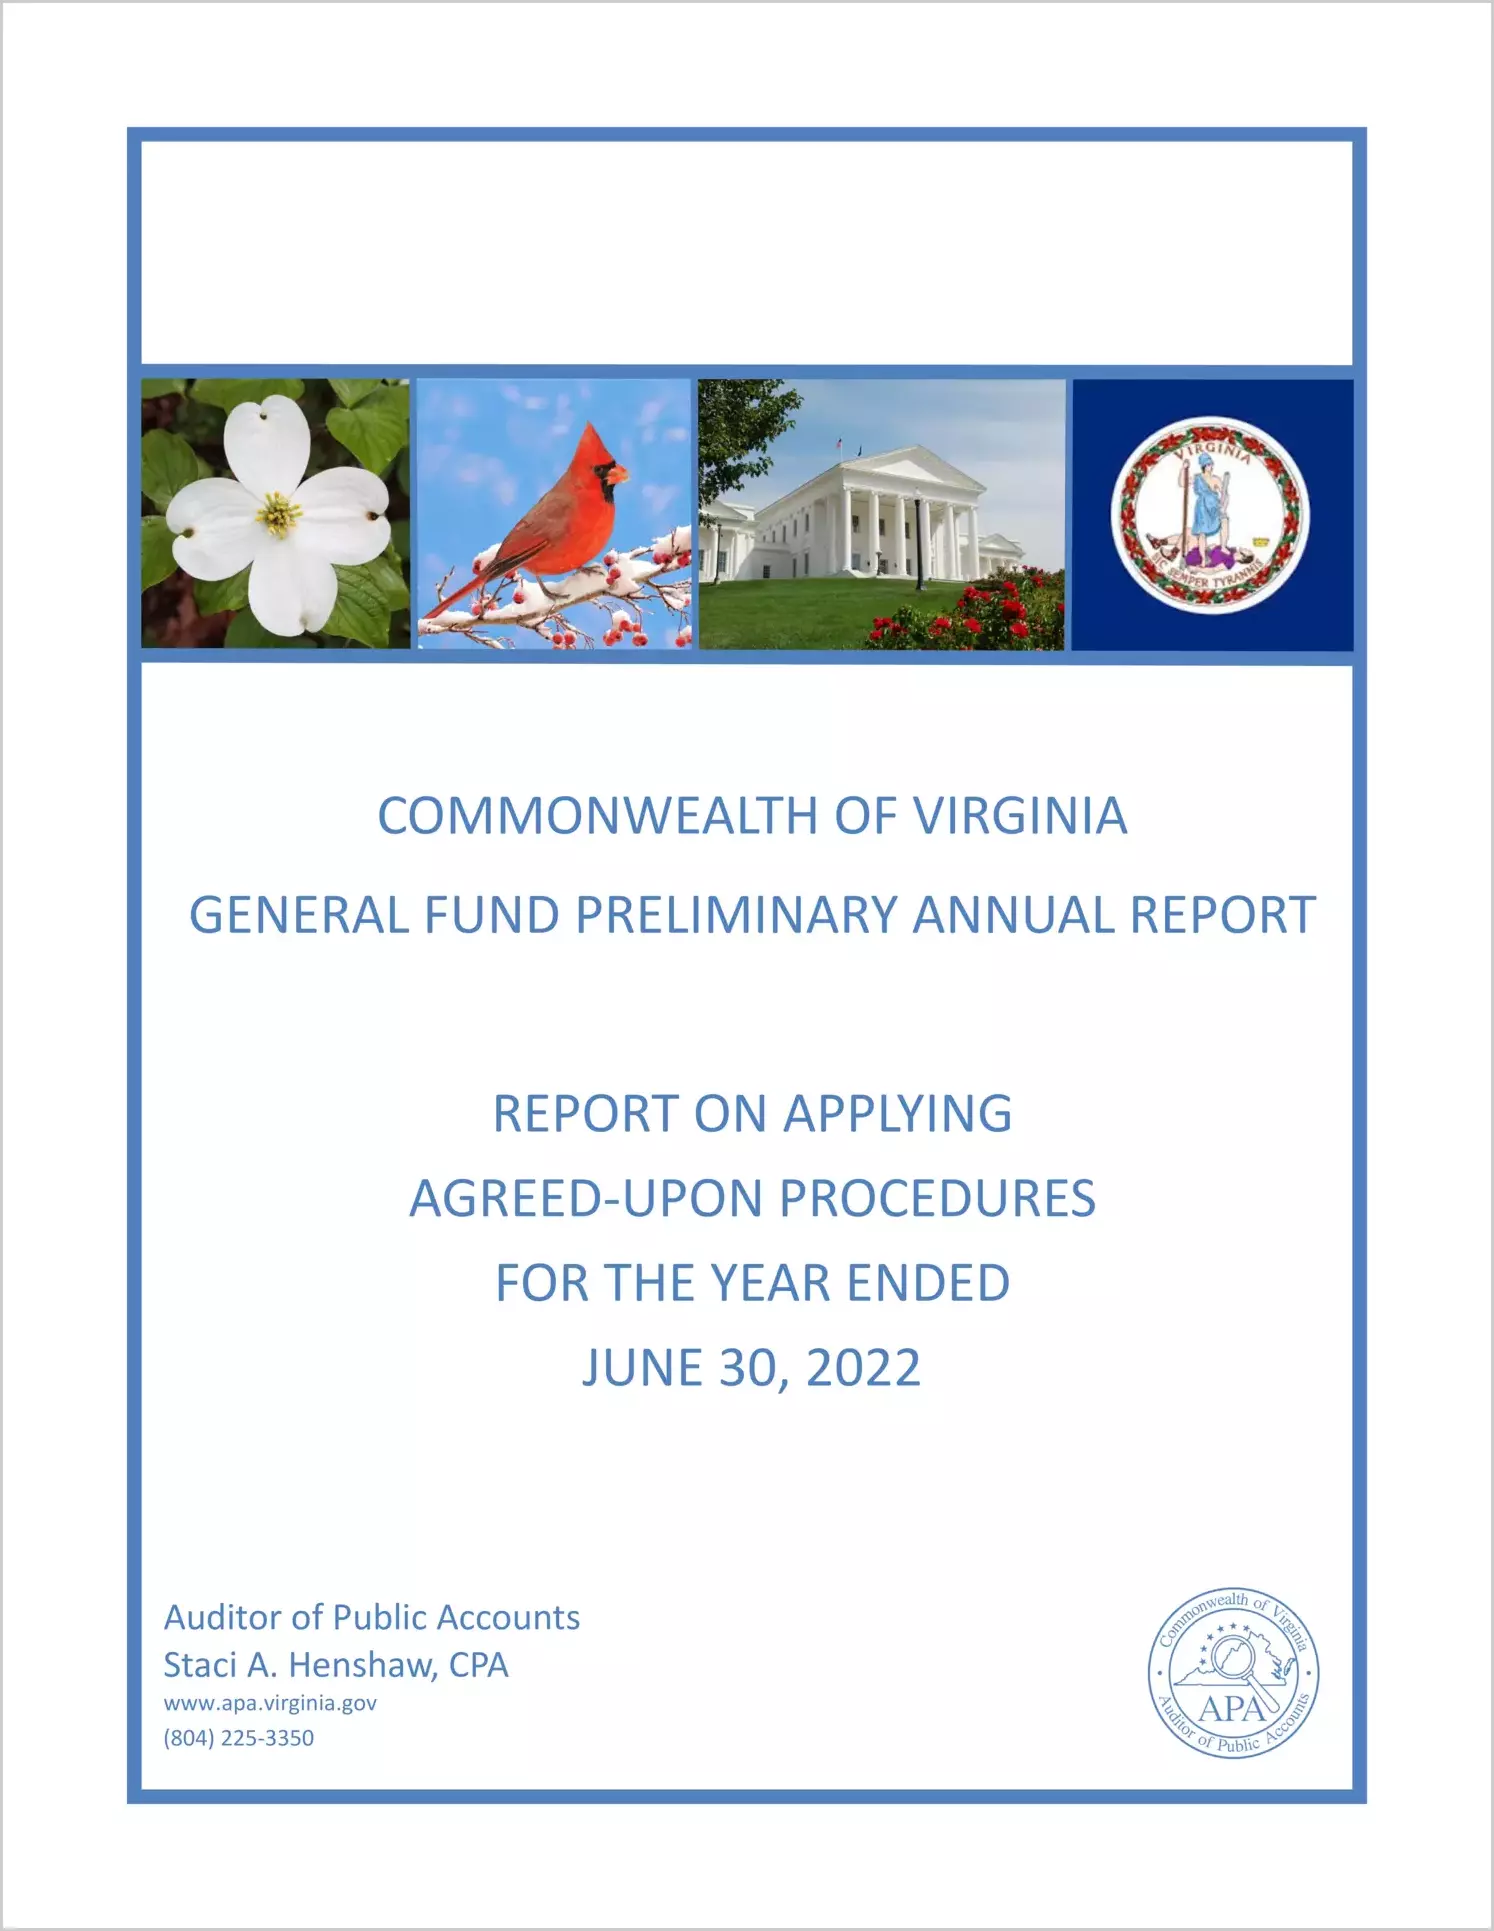 Commonwealth of Virginia General Fund Preliminary Annual Report for the year ended June 30, 2022